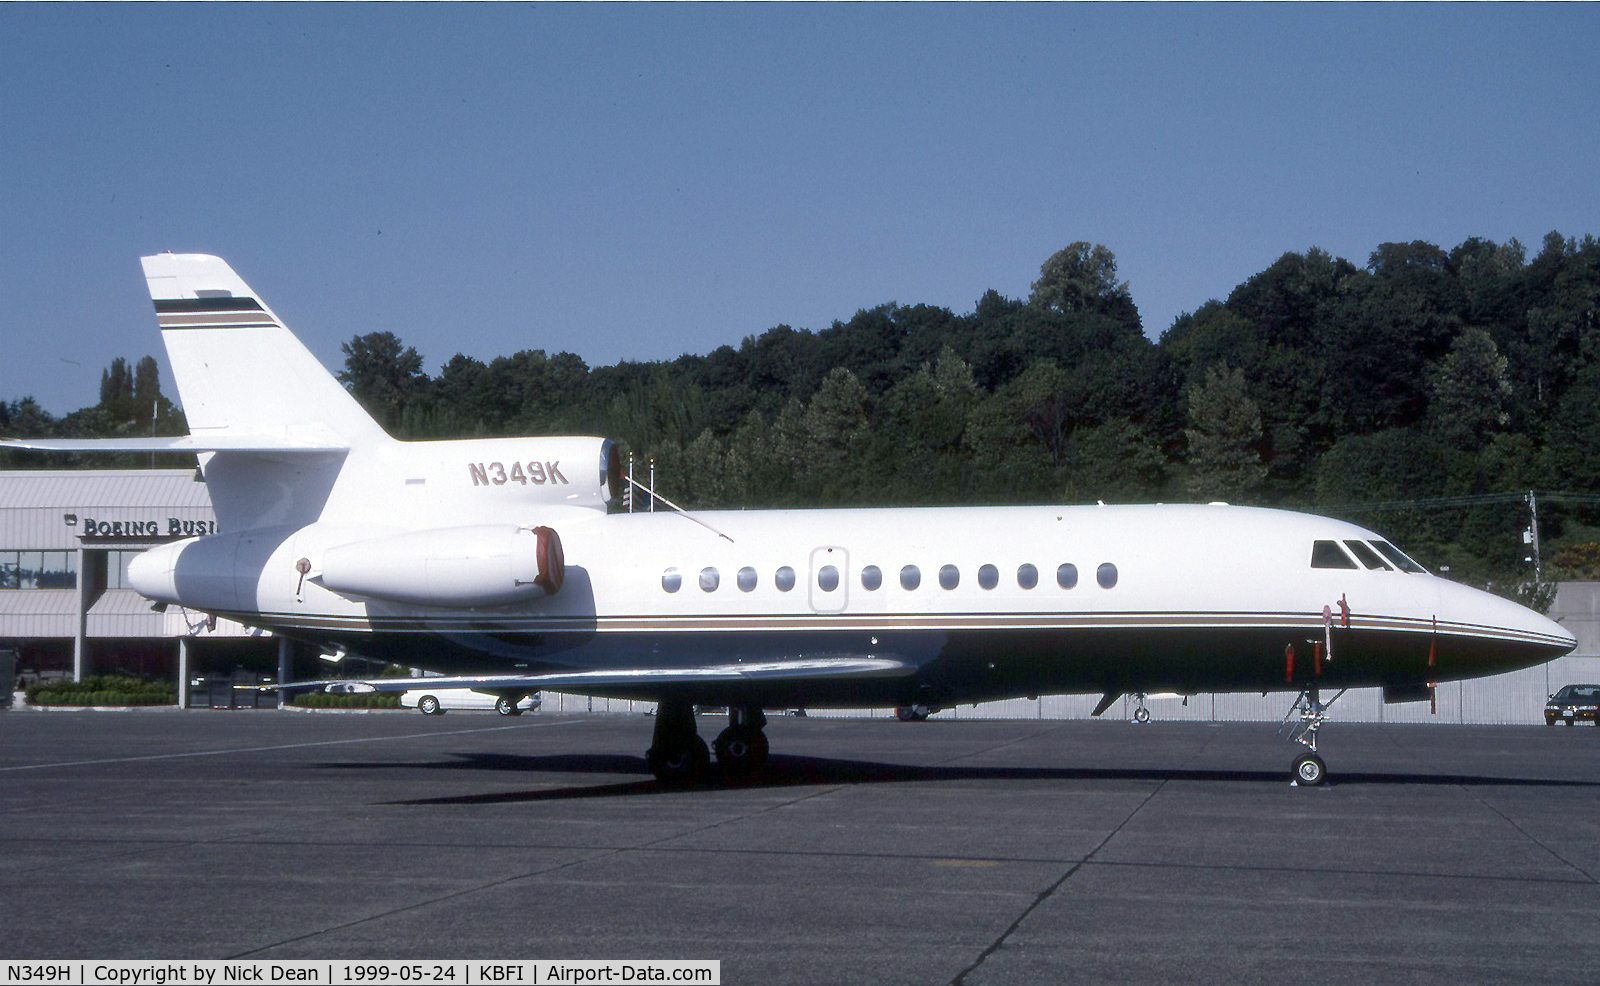 N349H, 1987 Dassault Falcon 900 C/N 10, Seen here as N349K This airframe is currently registered N349H as posted